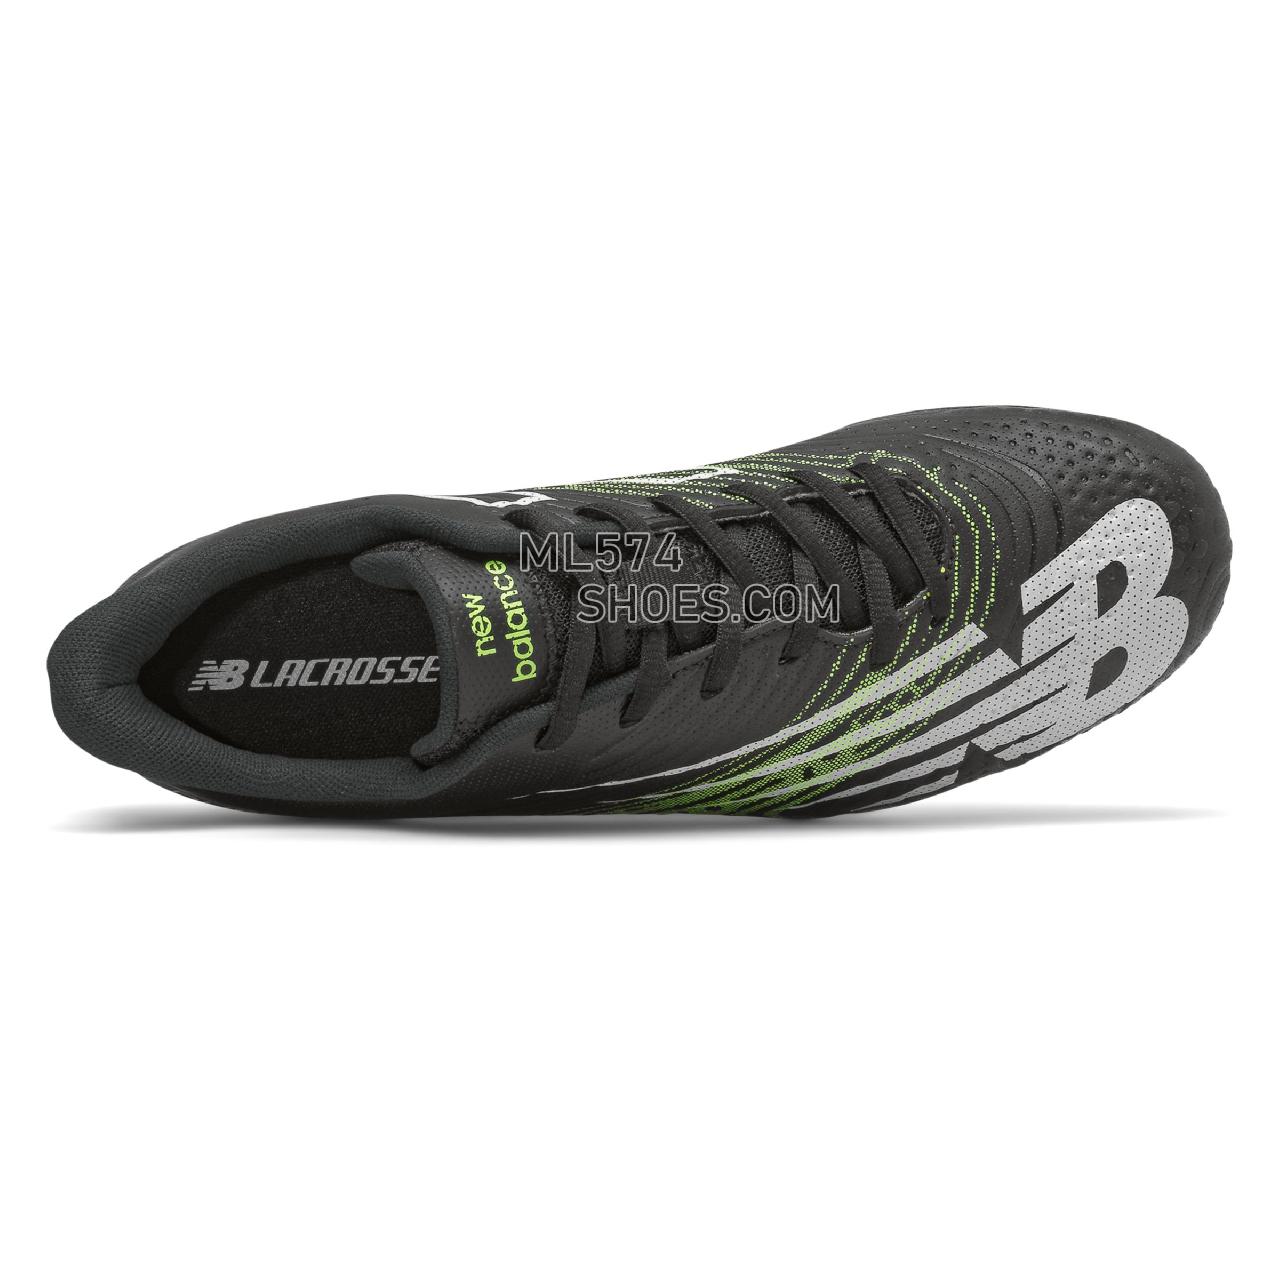 New Balance RushV3 Low - Men's Turf And Lacrosse Cleats - Black with White - RUSHLB3